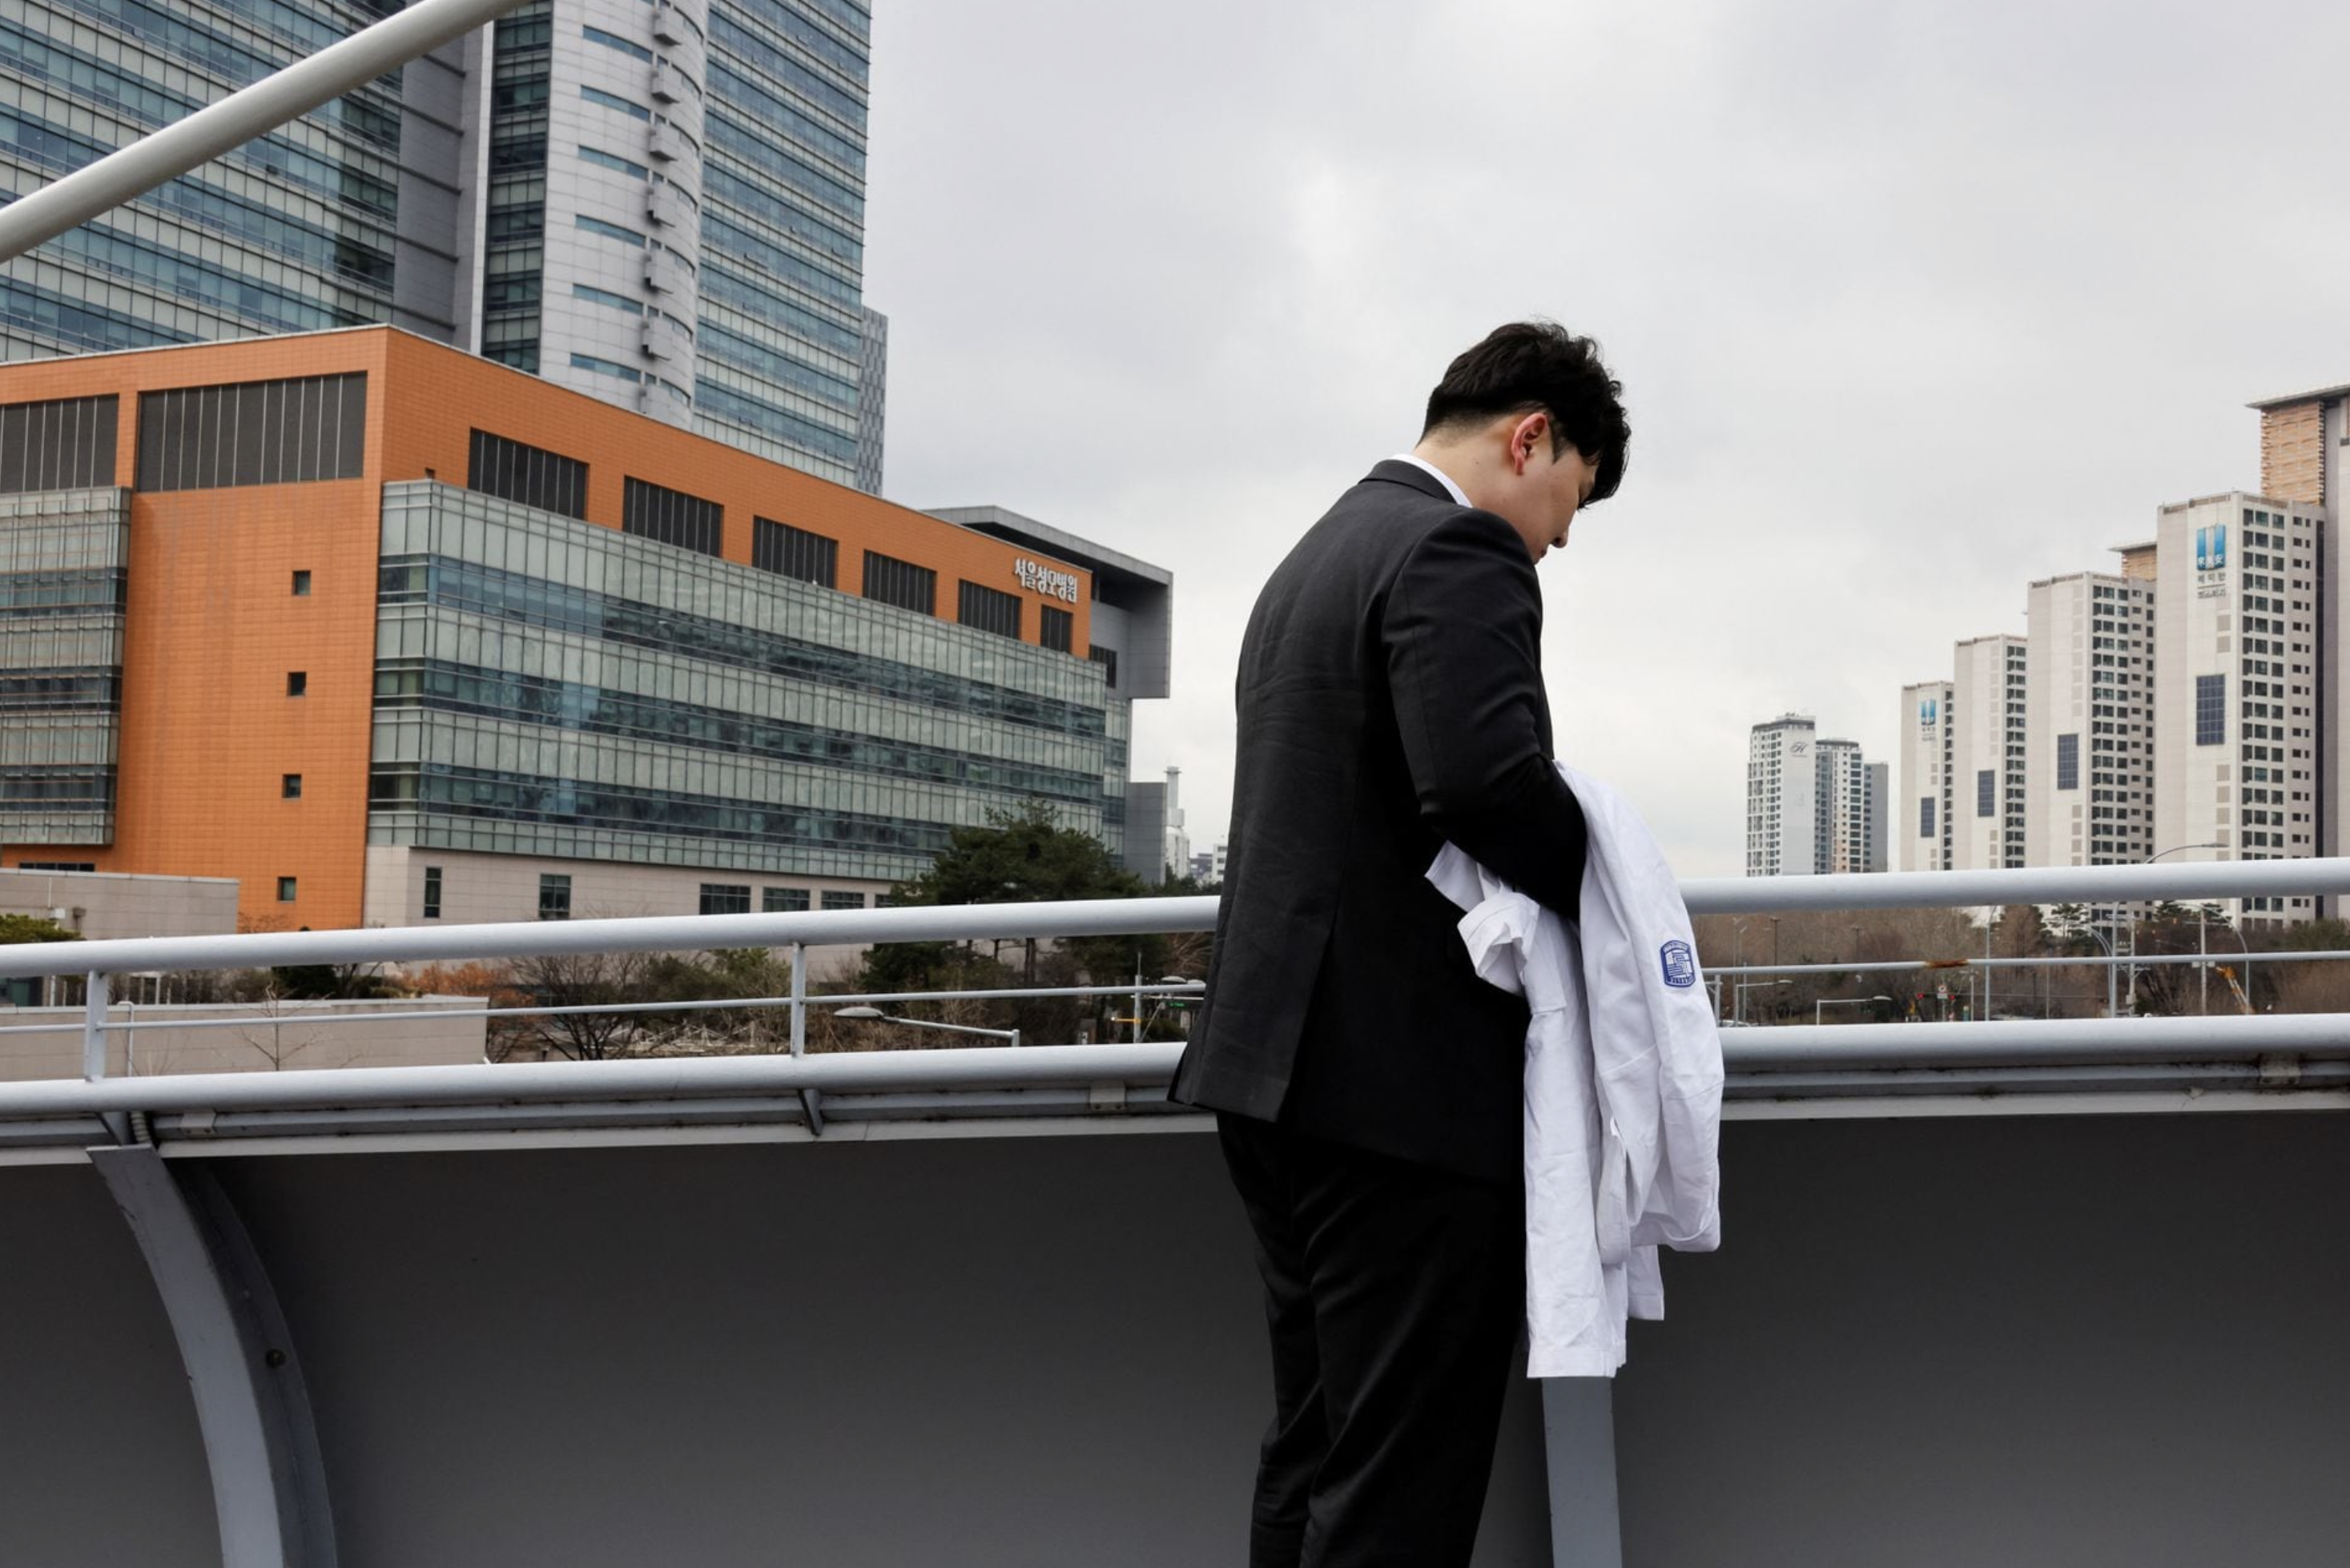 South Korea doctors on mass walkout say they are overworked and unheard